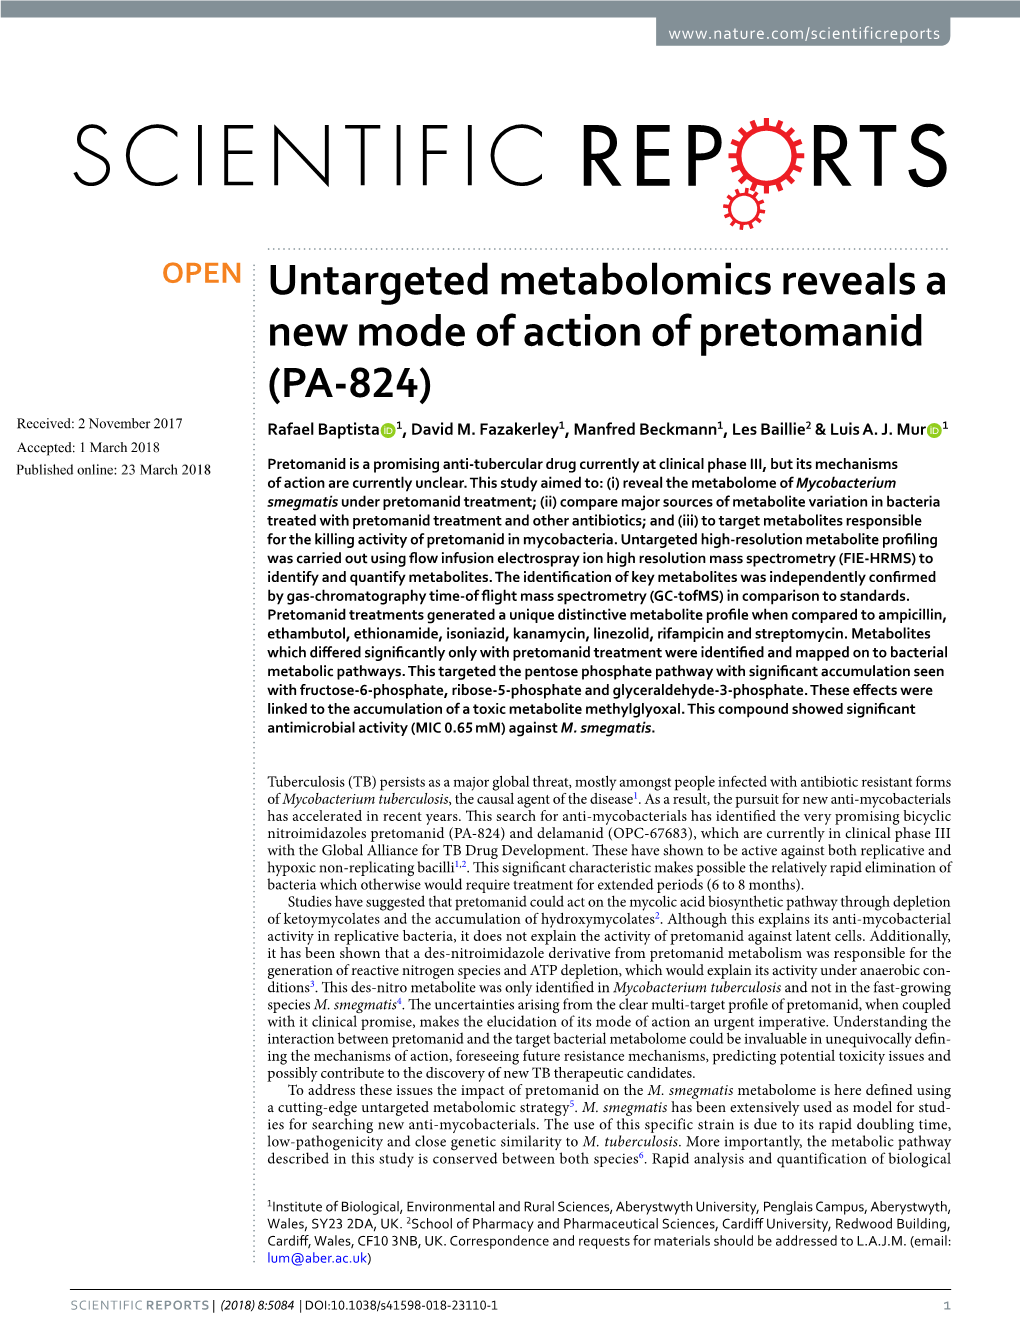 Untargeted Metabolomics Reveals a New Mode of Action of Pretomanid (PA-824) Received: 2 November 2017 Rafael Baptista 1, David M